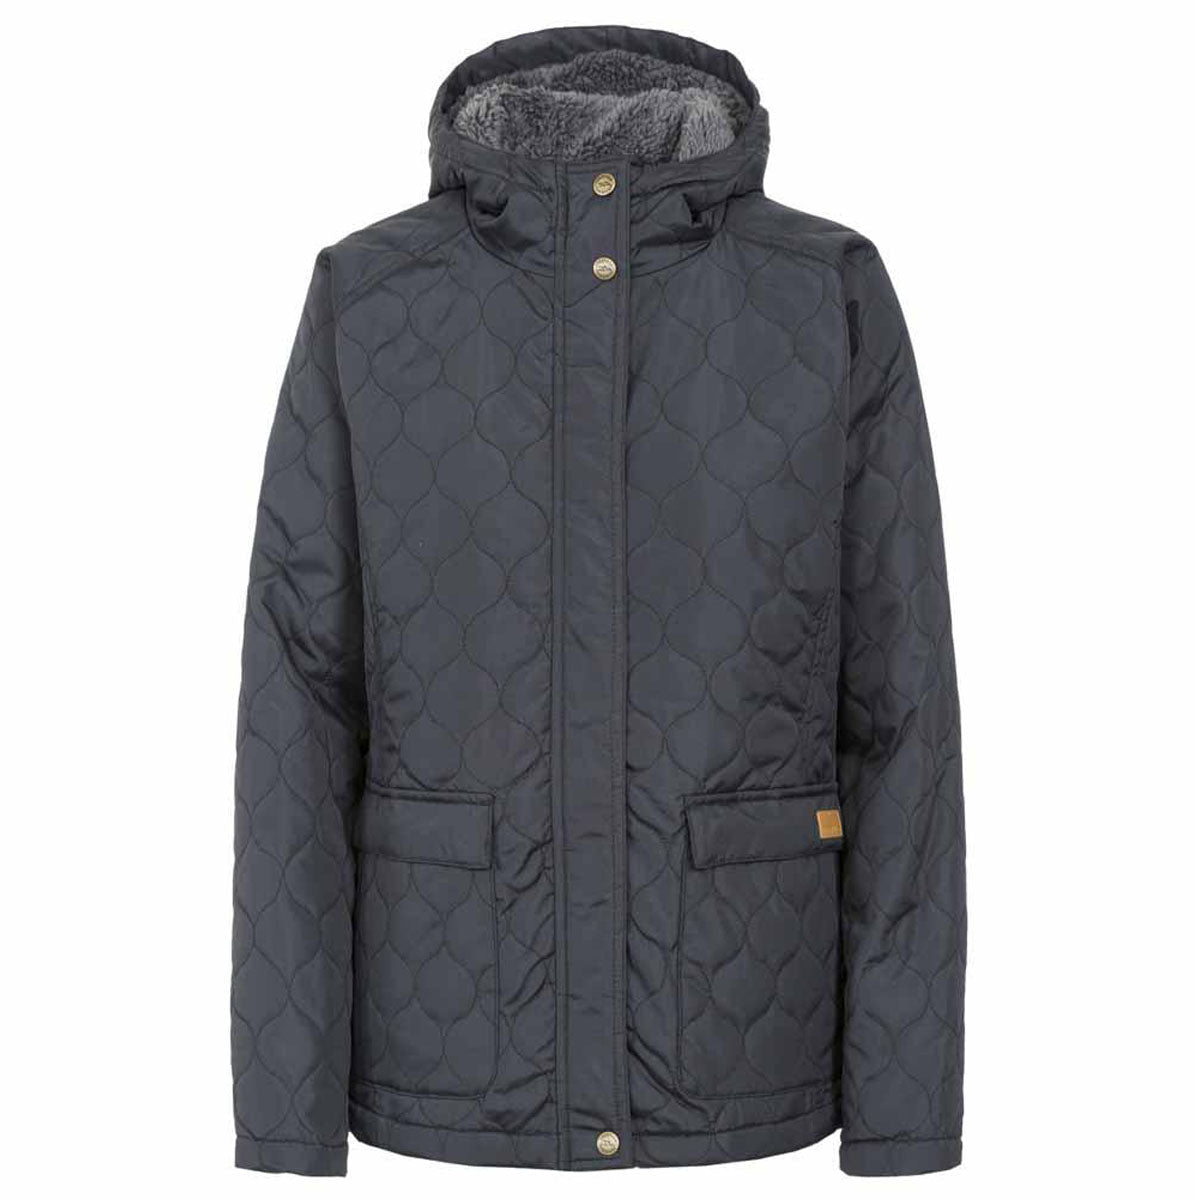 Trespass Ladies Tempted Jacket - Quilted Design, Lightly Padded, Fleece Lined Hood Womens Jacket Cosy Camping Co. BLACK S 